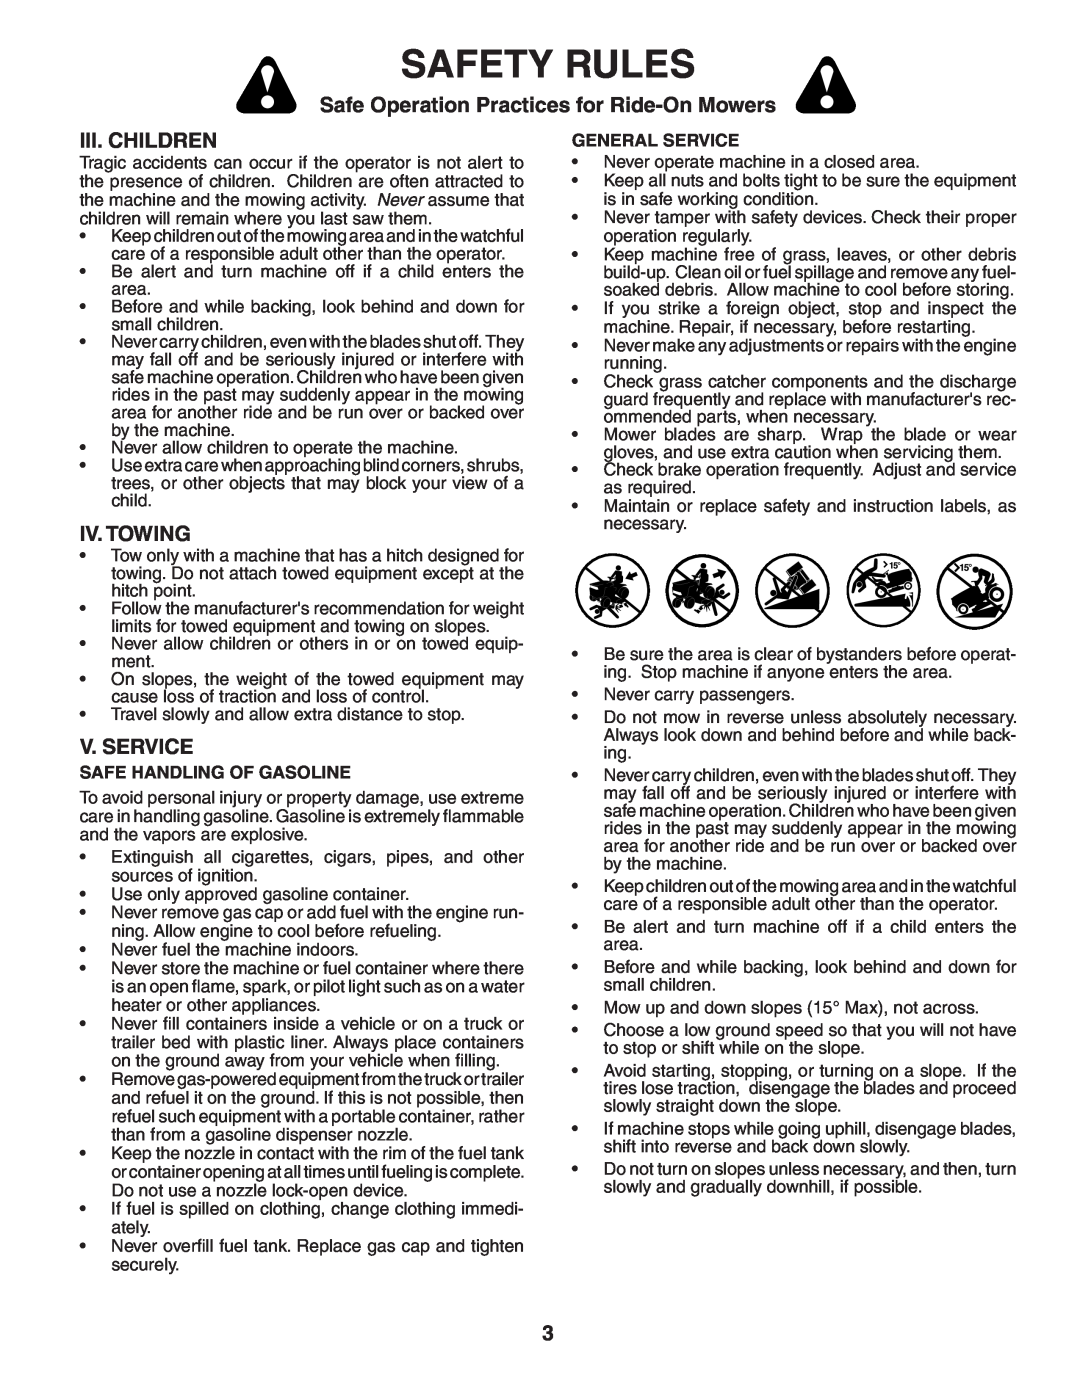 Poulan PB22H48YT manual Iii. Children, Iv. Towing, V. Service, Safety Rules, Safe Operation Practices for Ride-On Mowers 